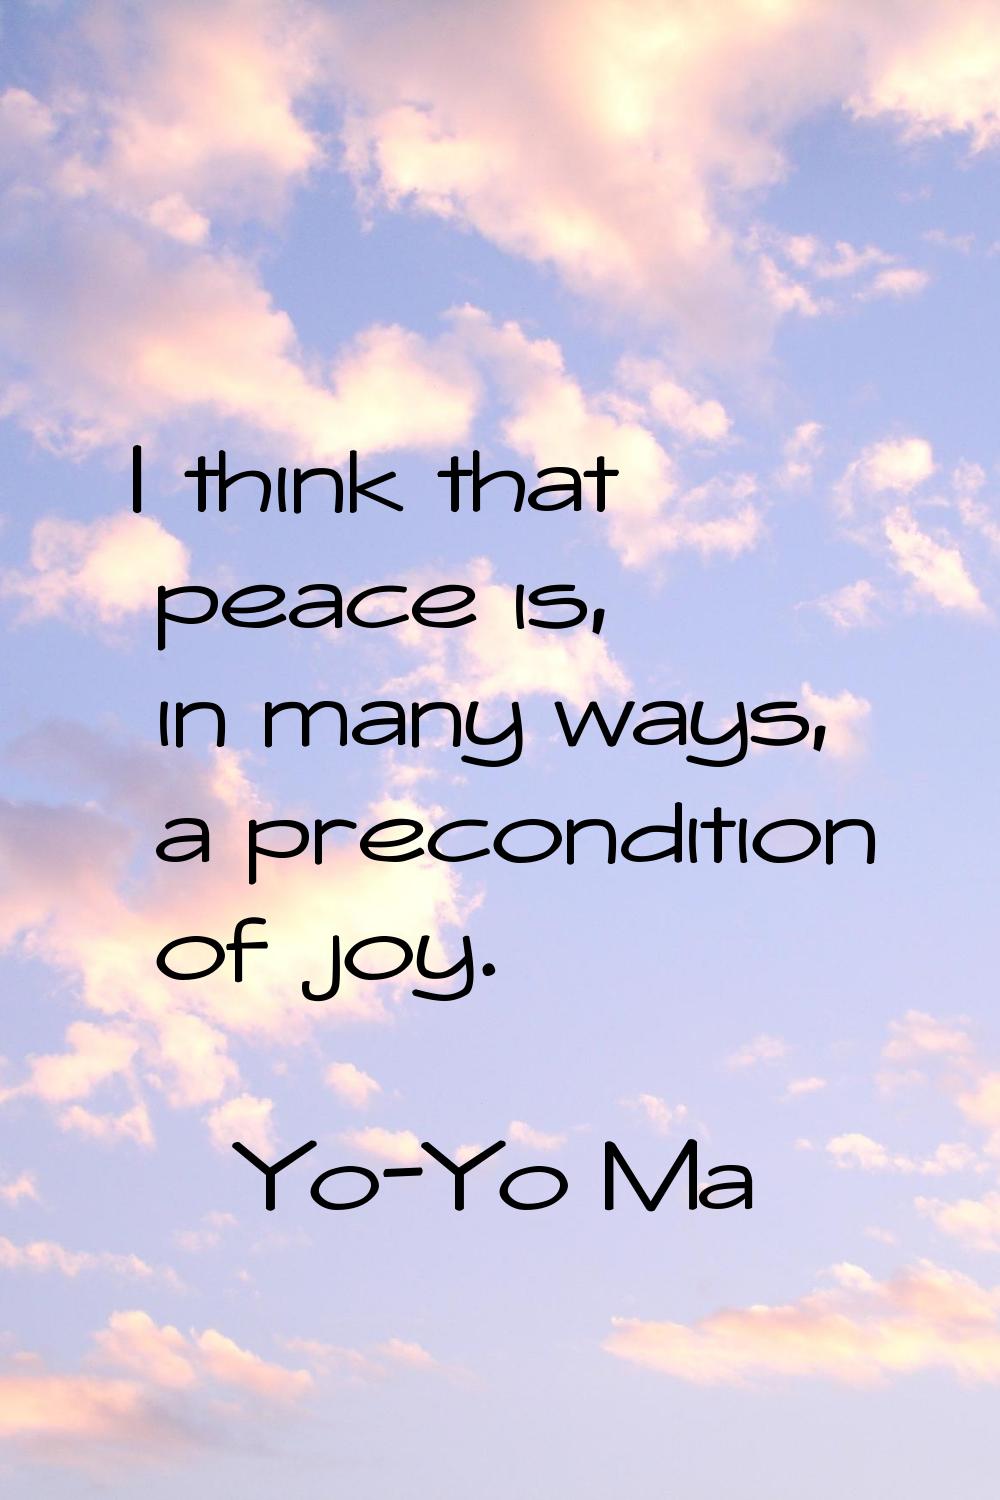 I think that peace is, in many ways, a precondition of joy.